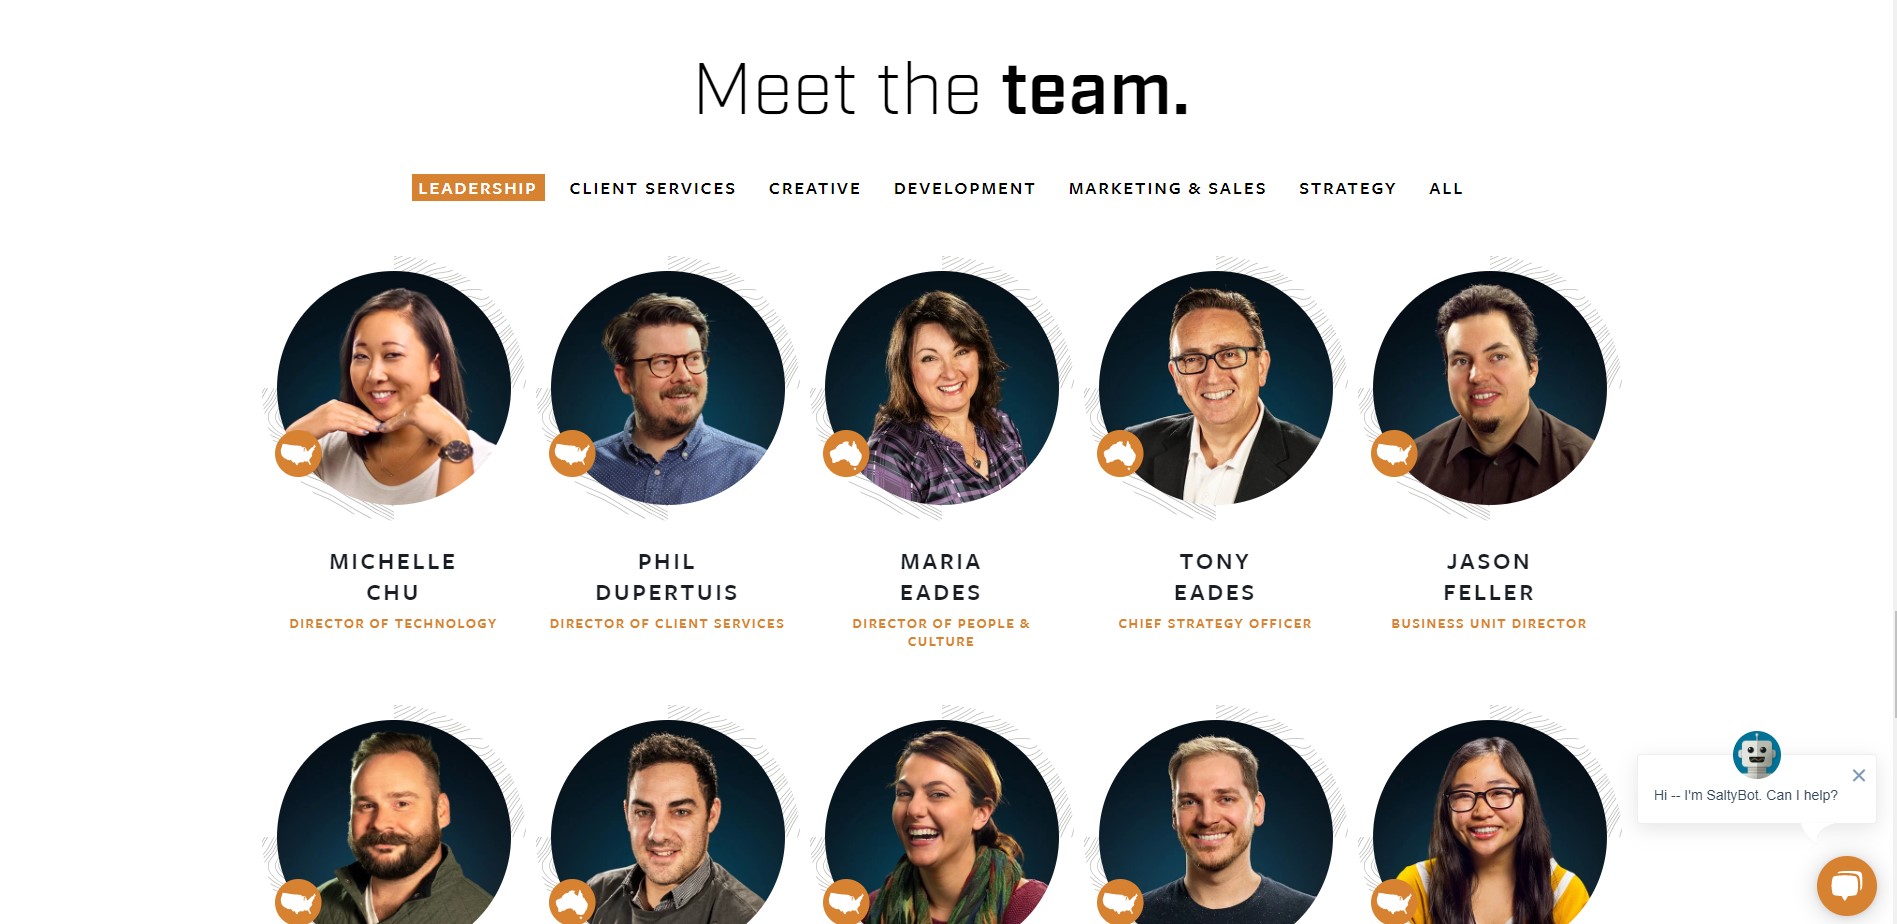 5-awesome-meet-the-team-page-examples